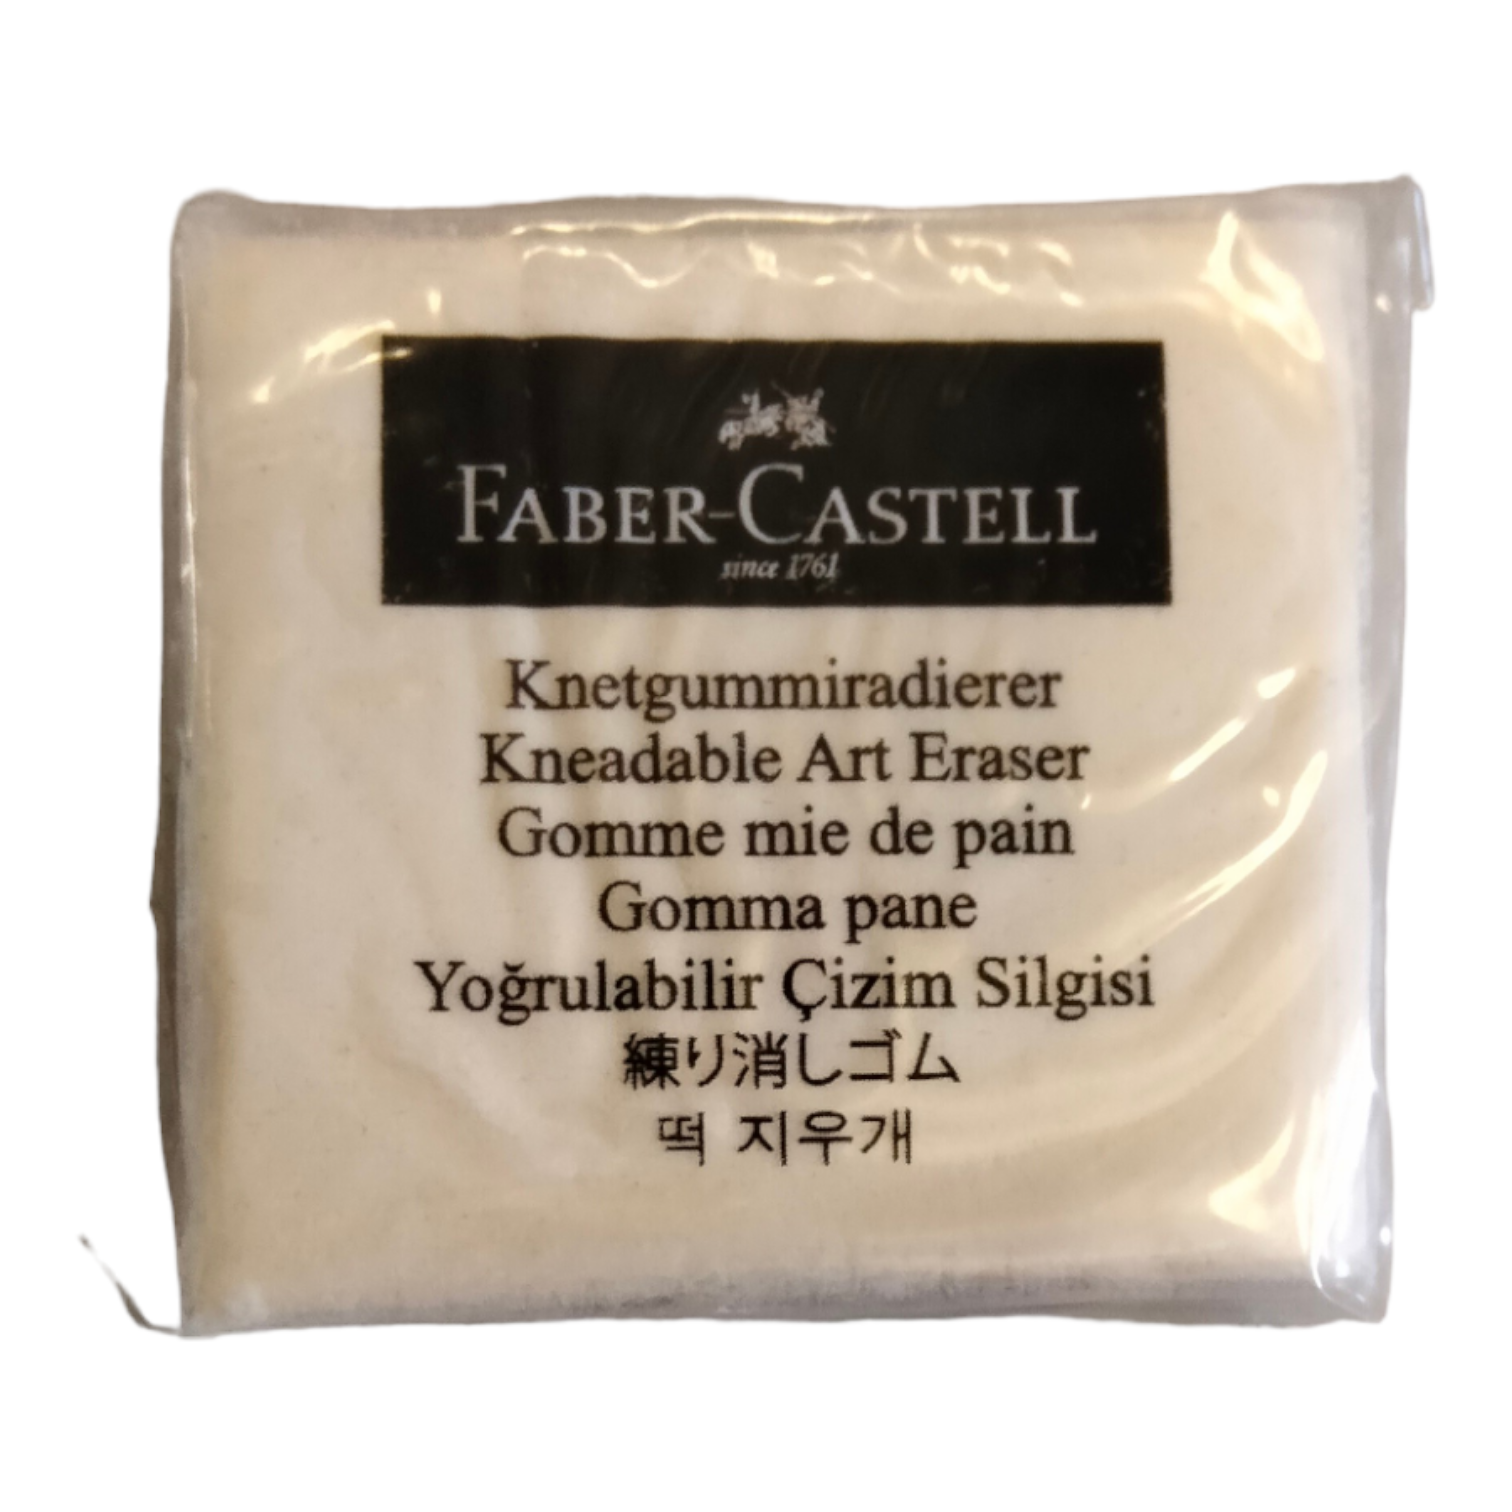 Faber Castell - Gomma pane